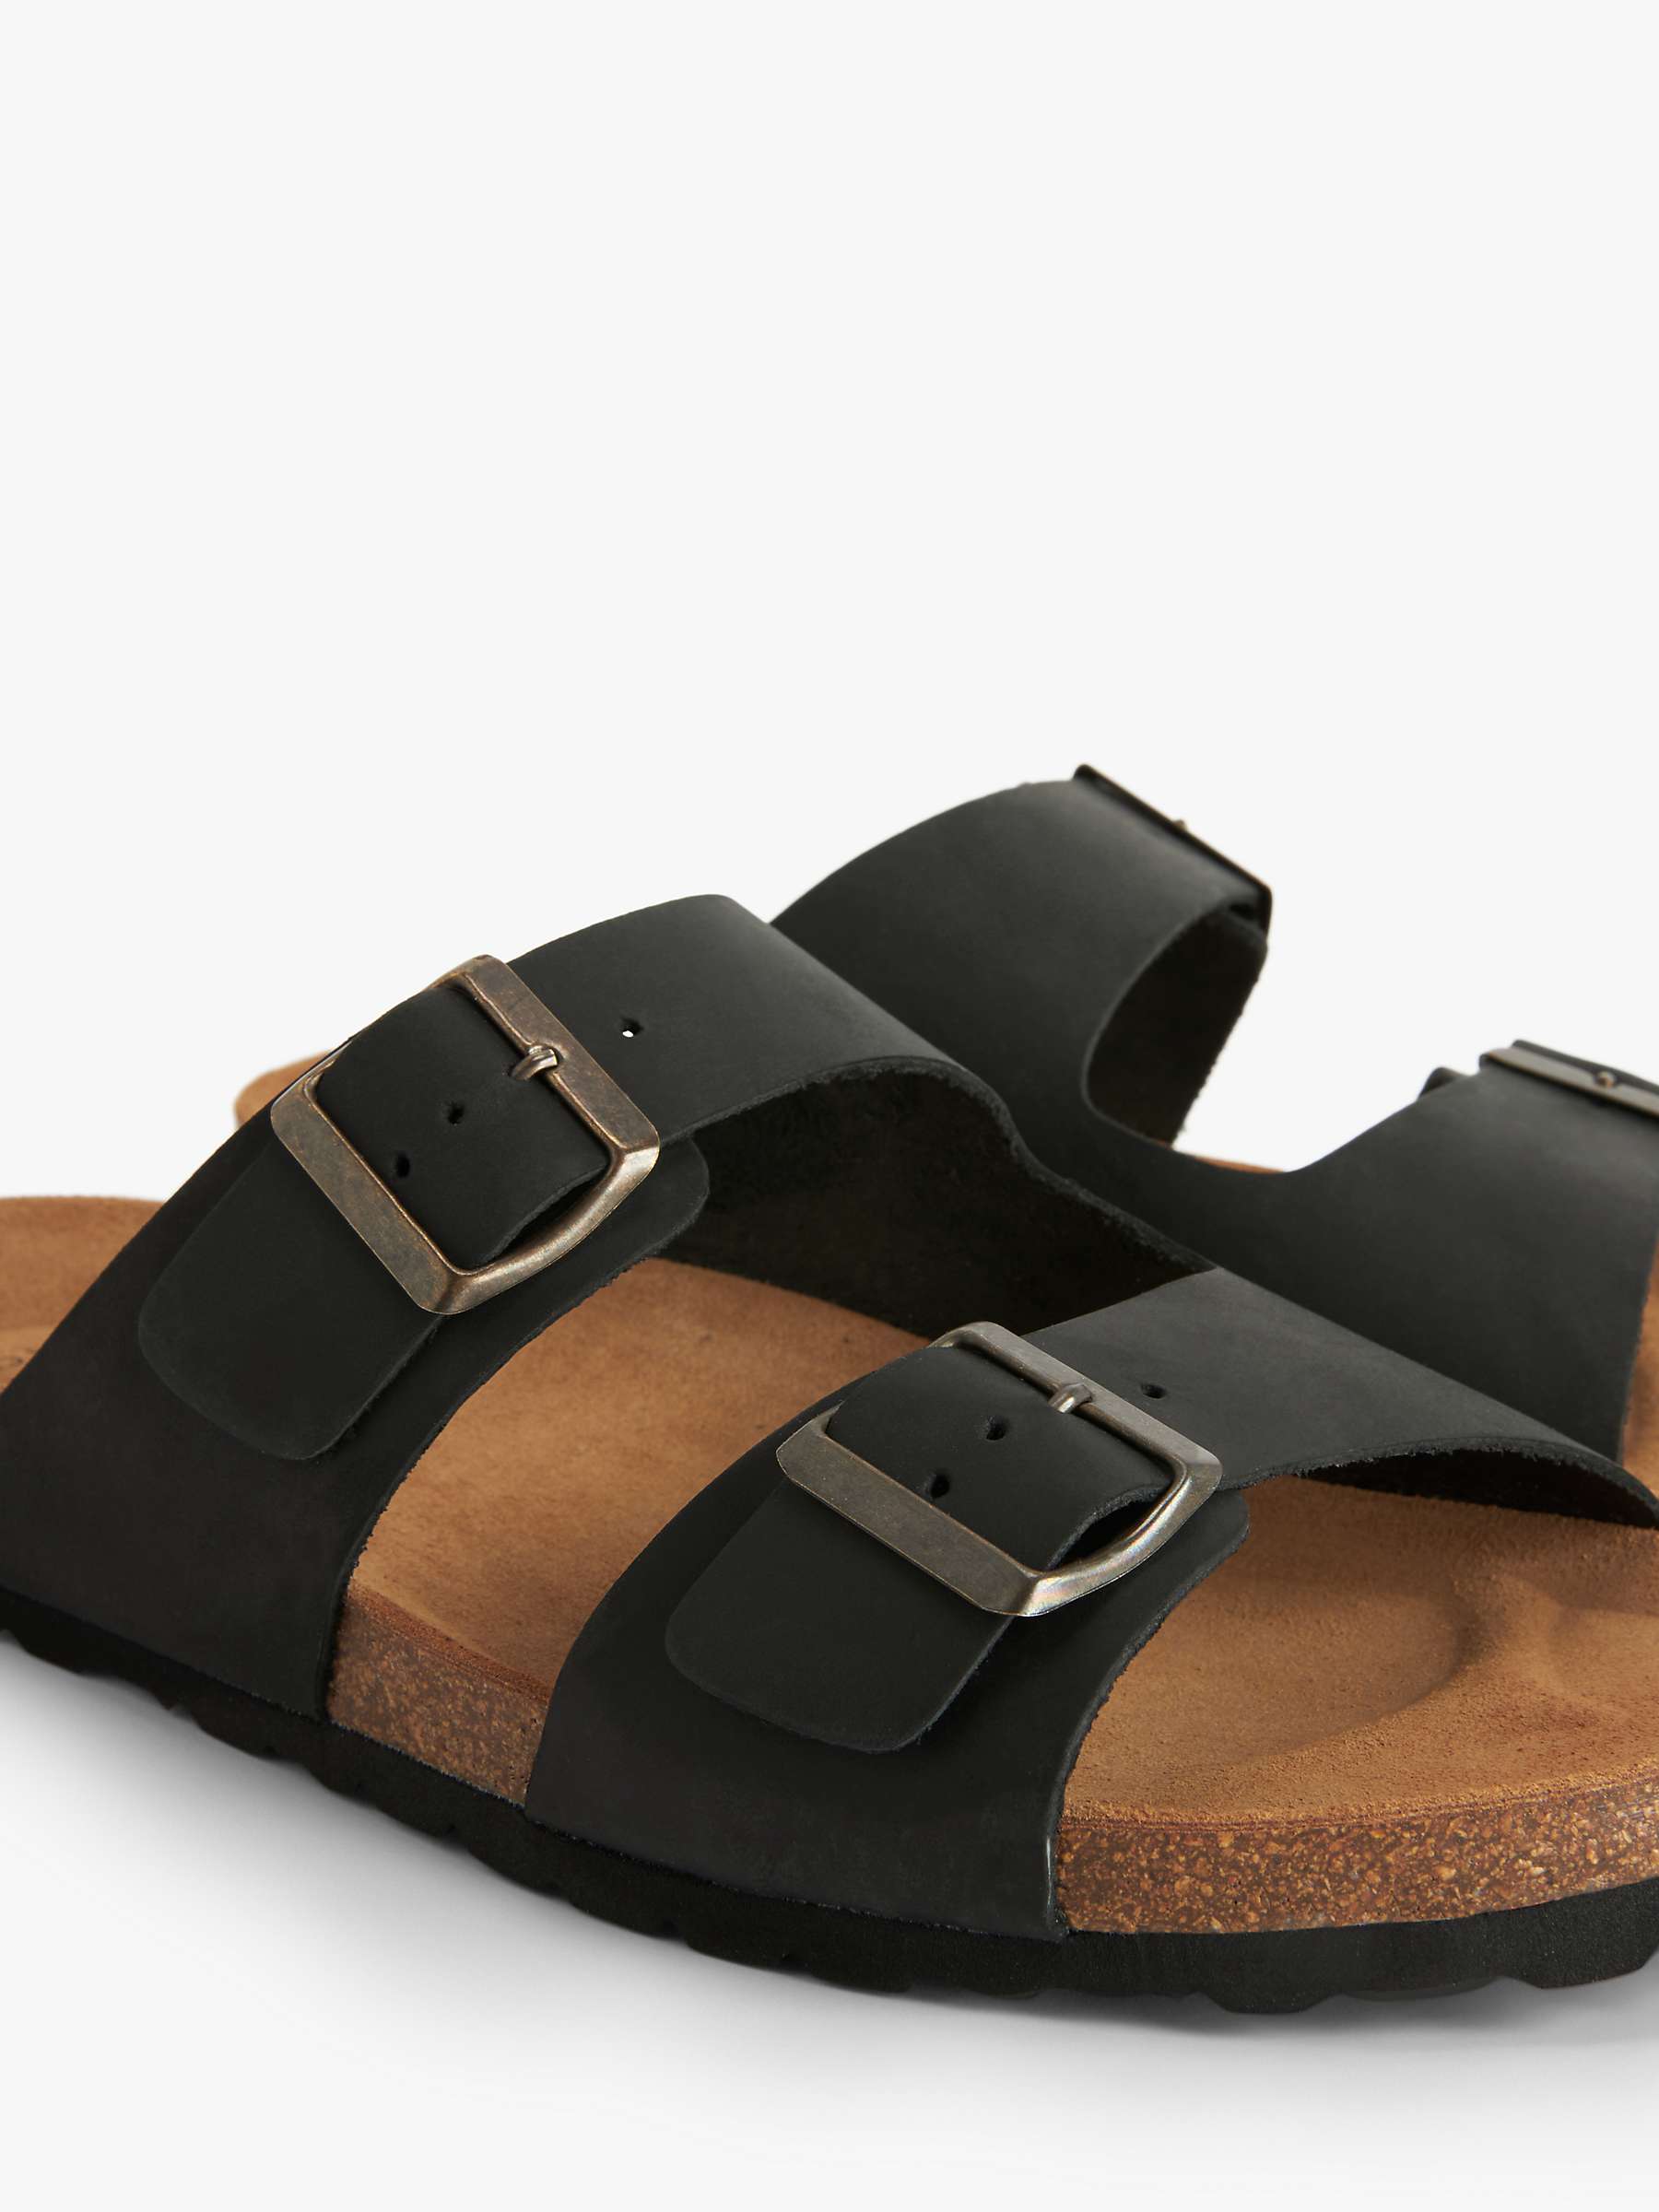 Buy John Lewis Two Strap Footbed Leather Sandals Online at johnlewis.com